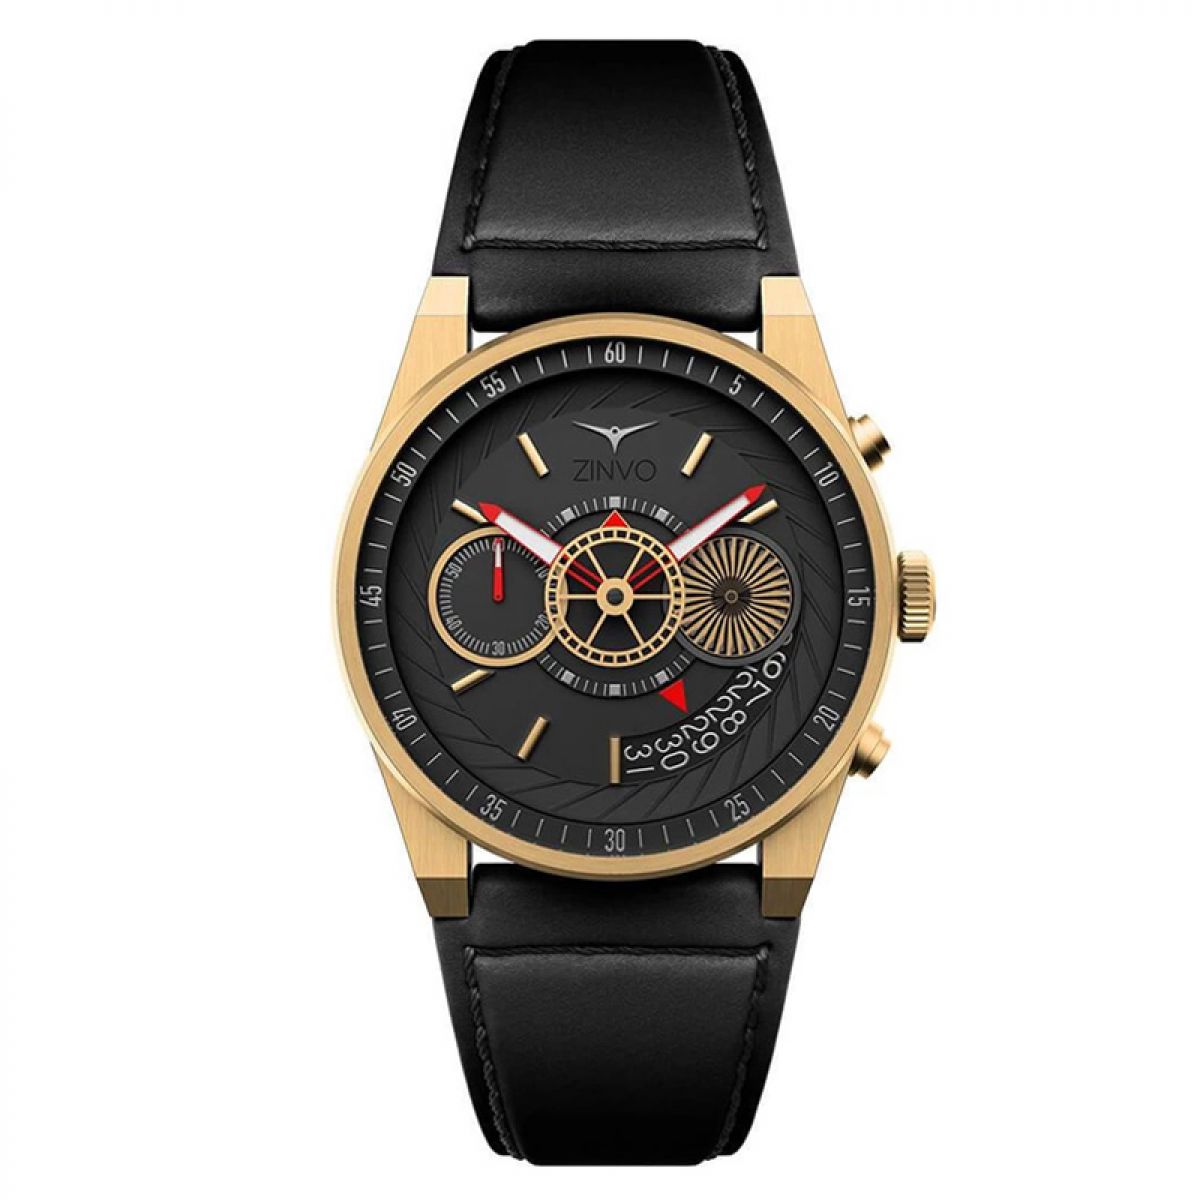 Archived Zinvo Chronographs | Gold